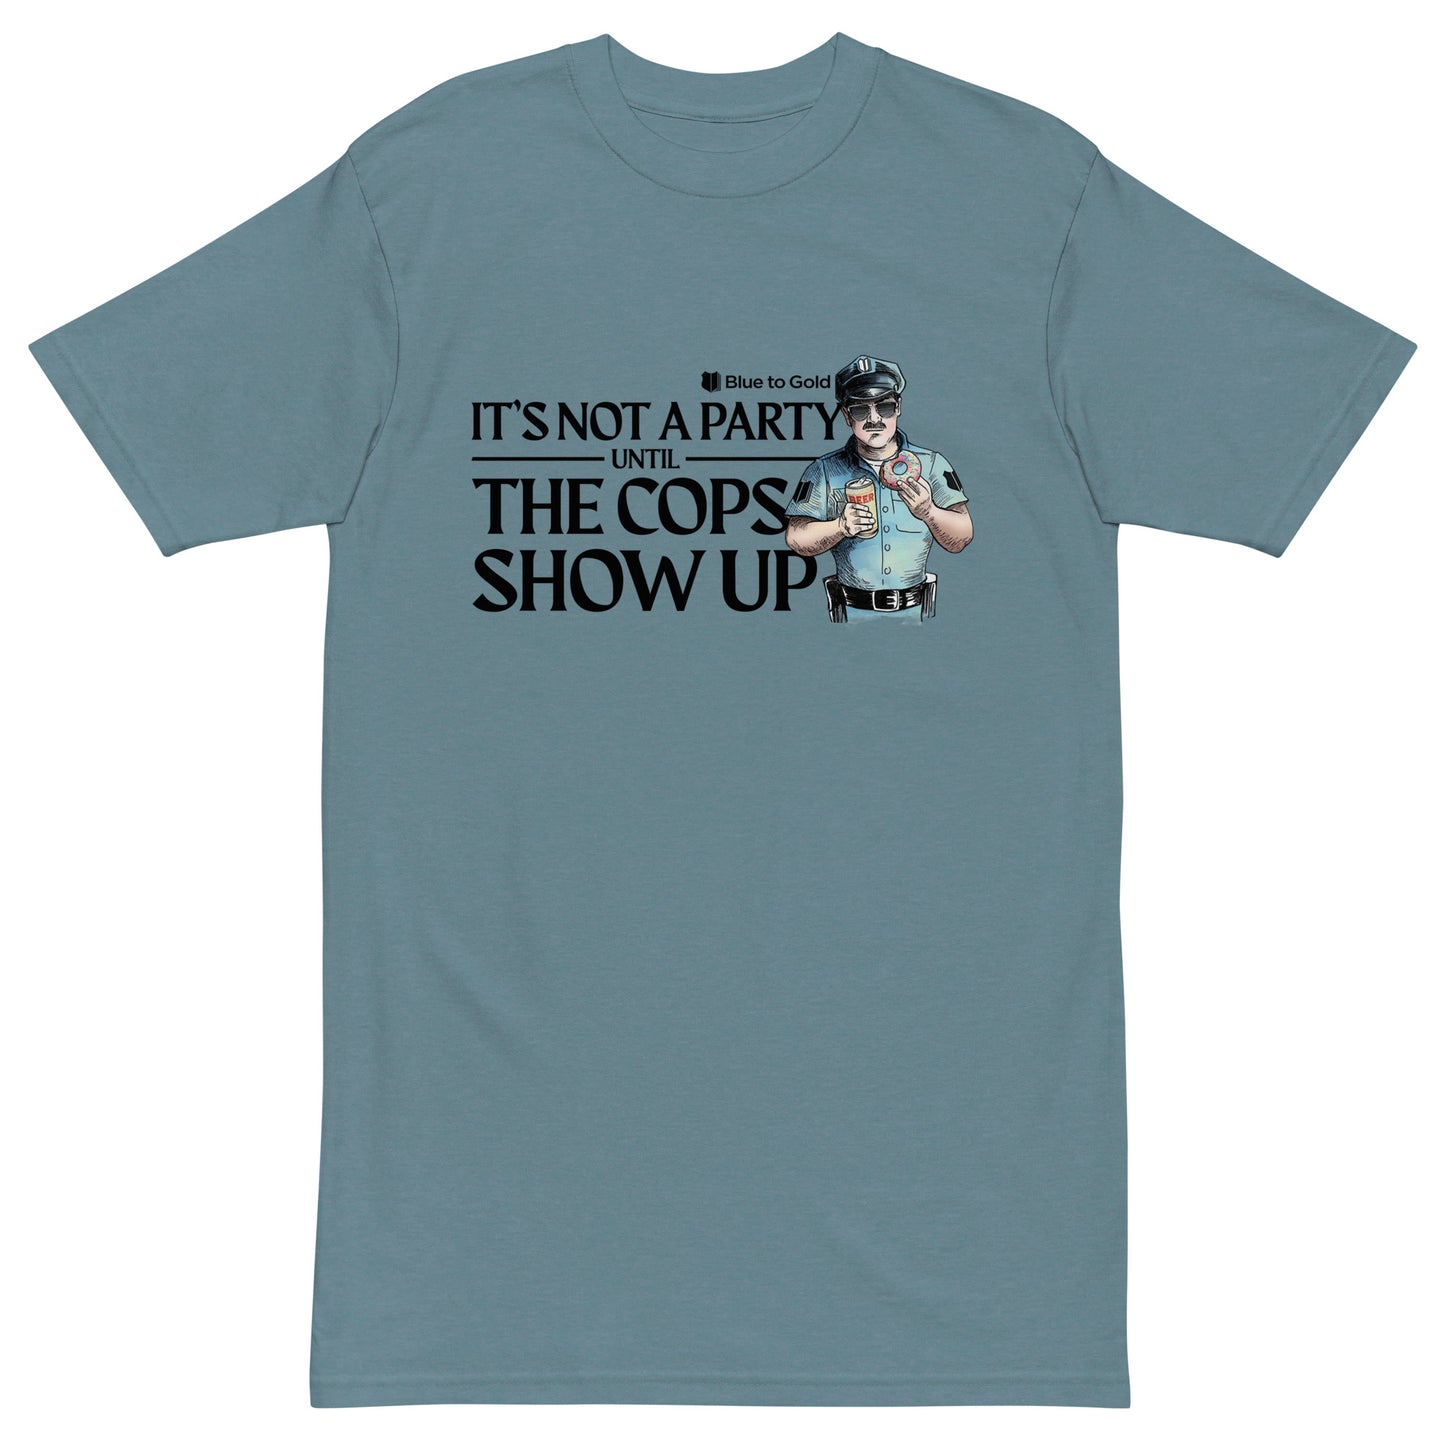 "It's Not A Party Until The Cops Show Up" Men’s premium heavyweight tee